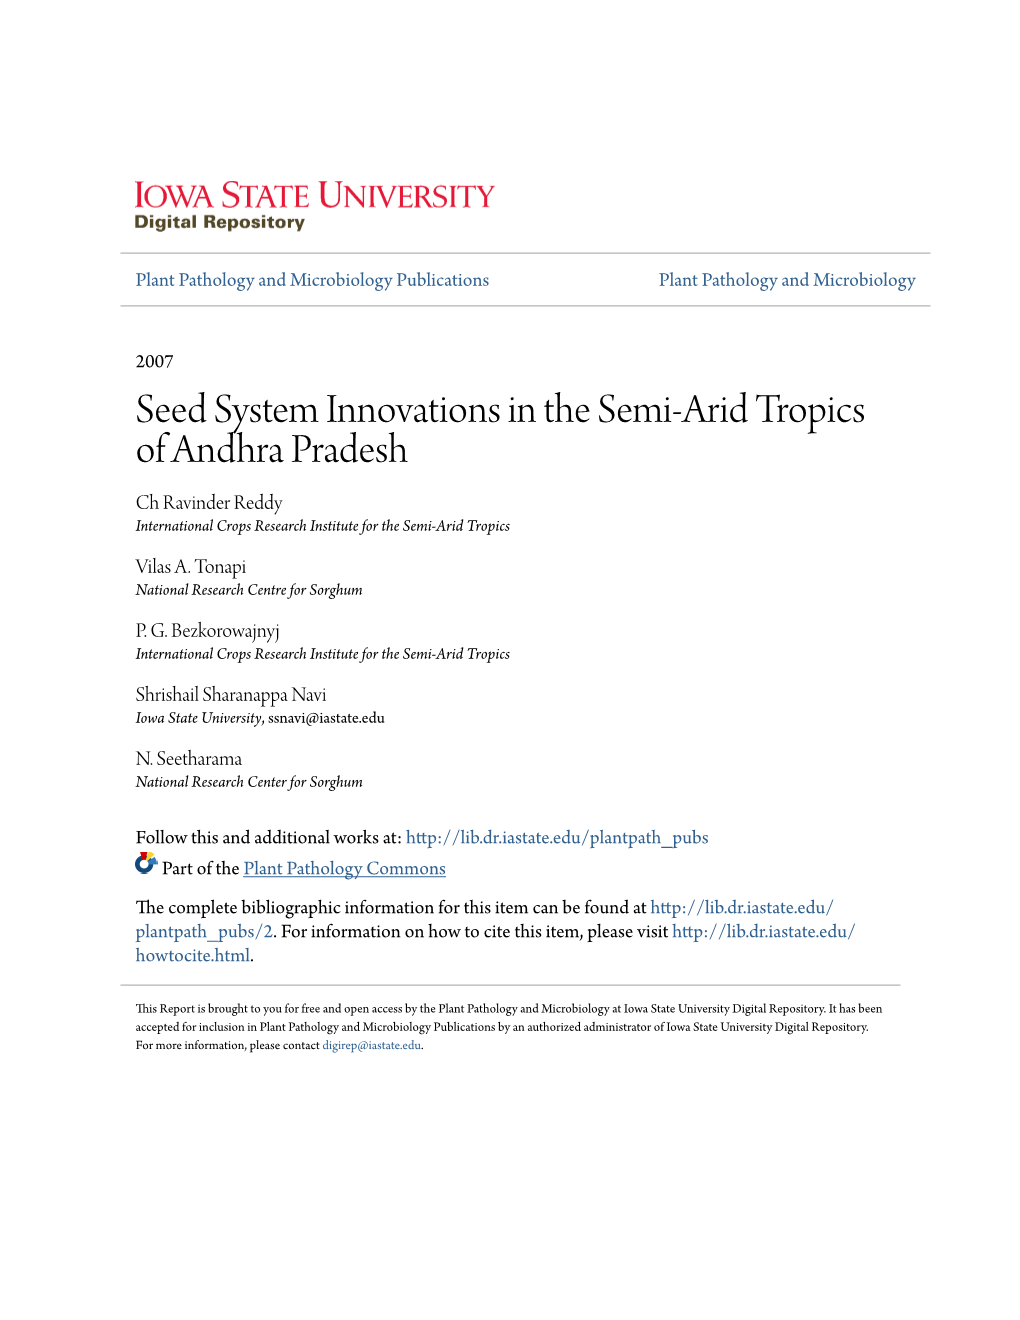 Seed System Innovations in the Semi-Arid Tropics of Andhra Pradesh Ch Ravinder Reddy International Crops Research Institute for the Semi-Arid Tropics